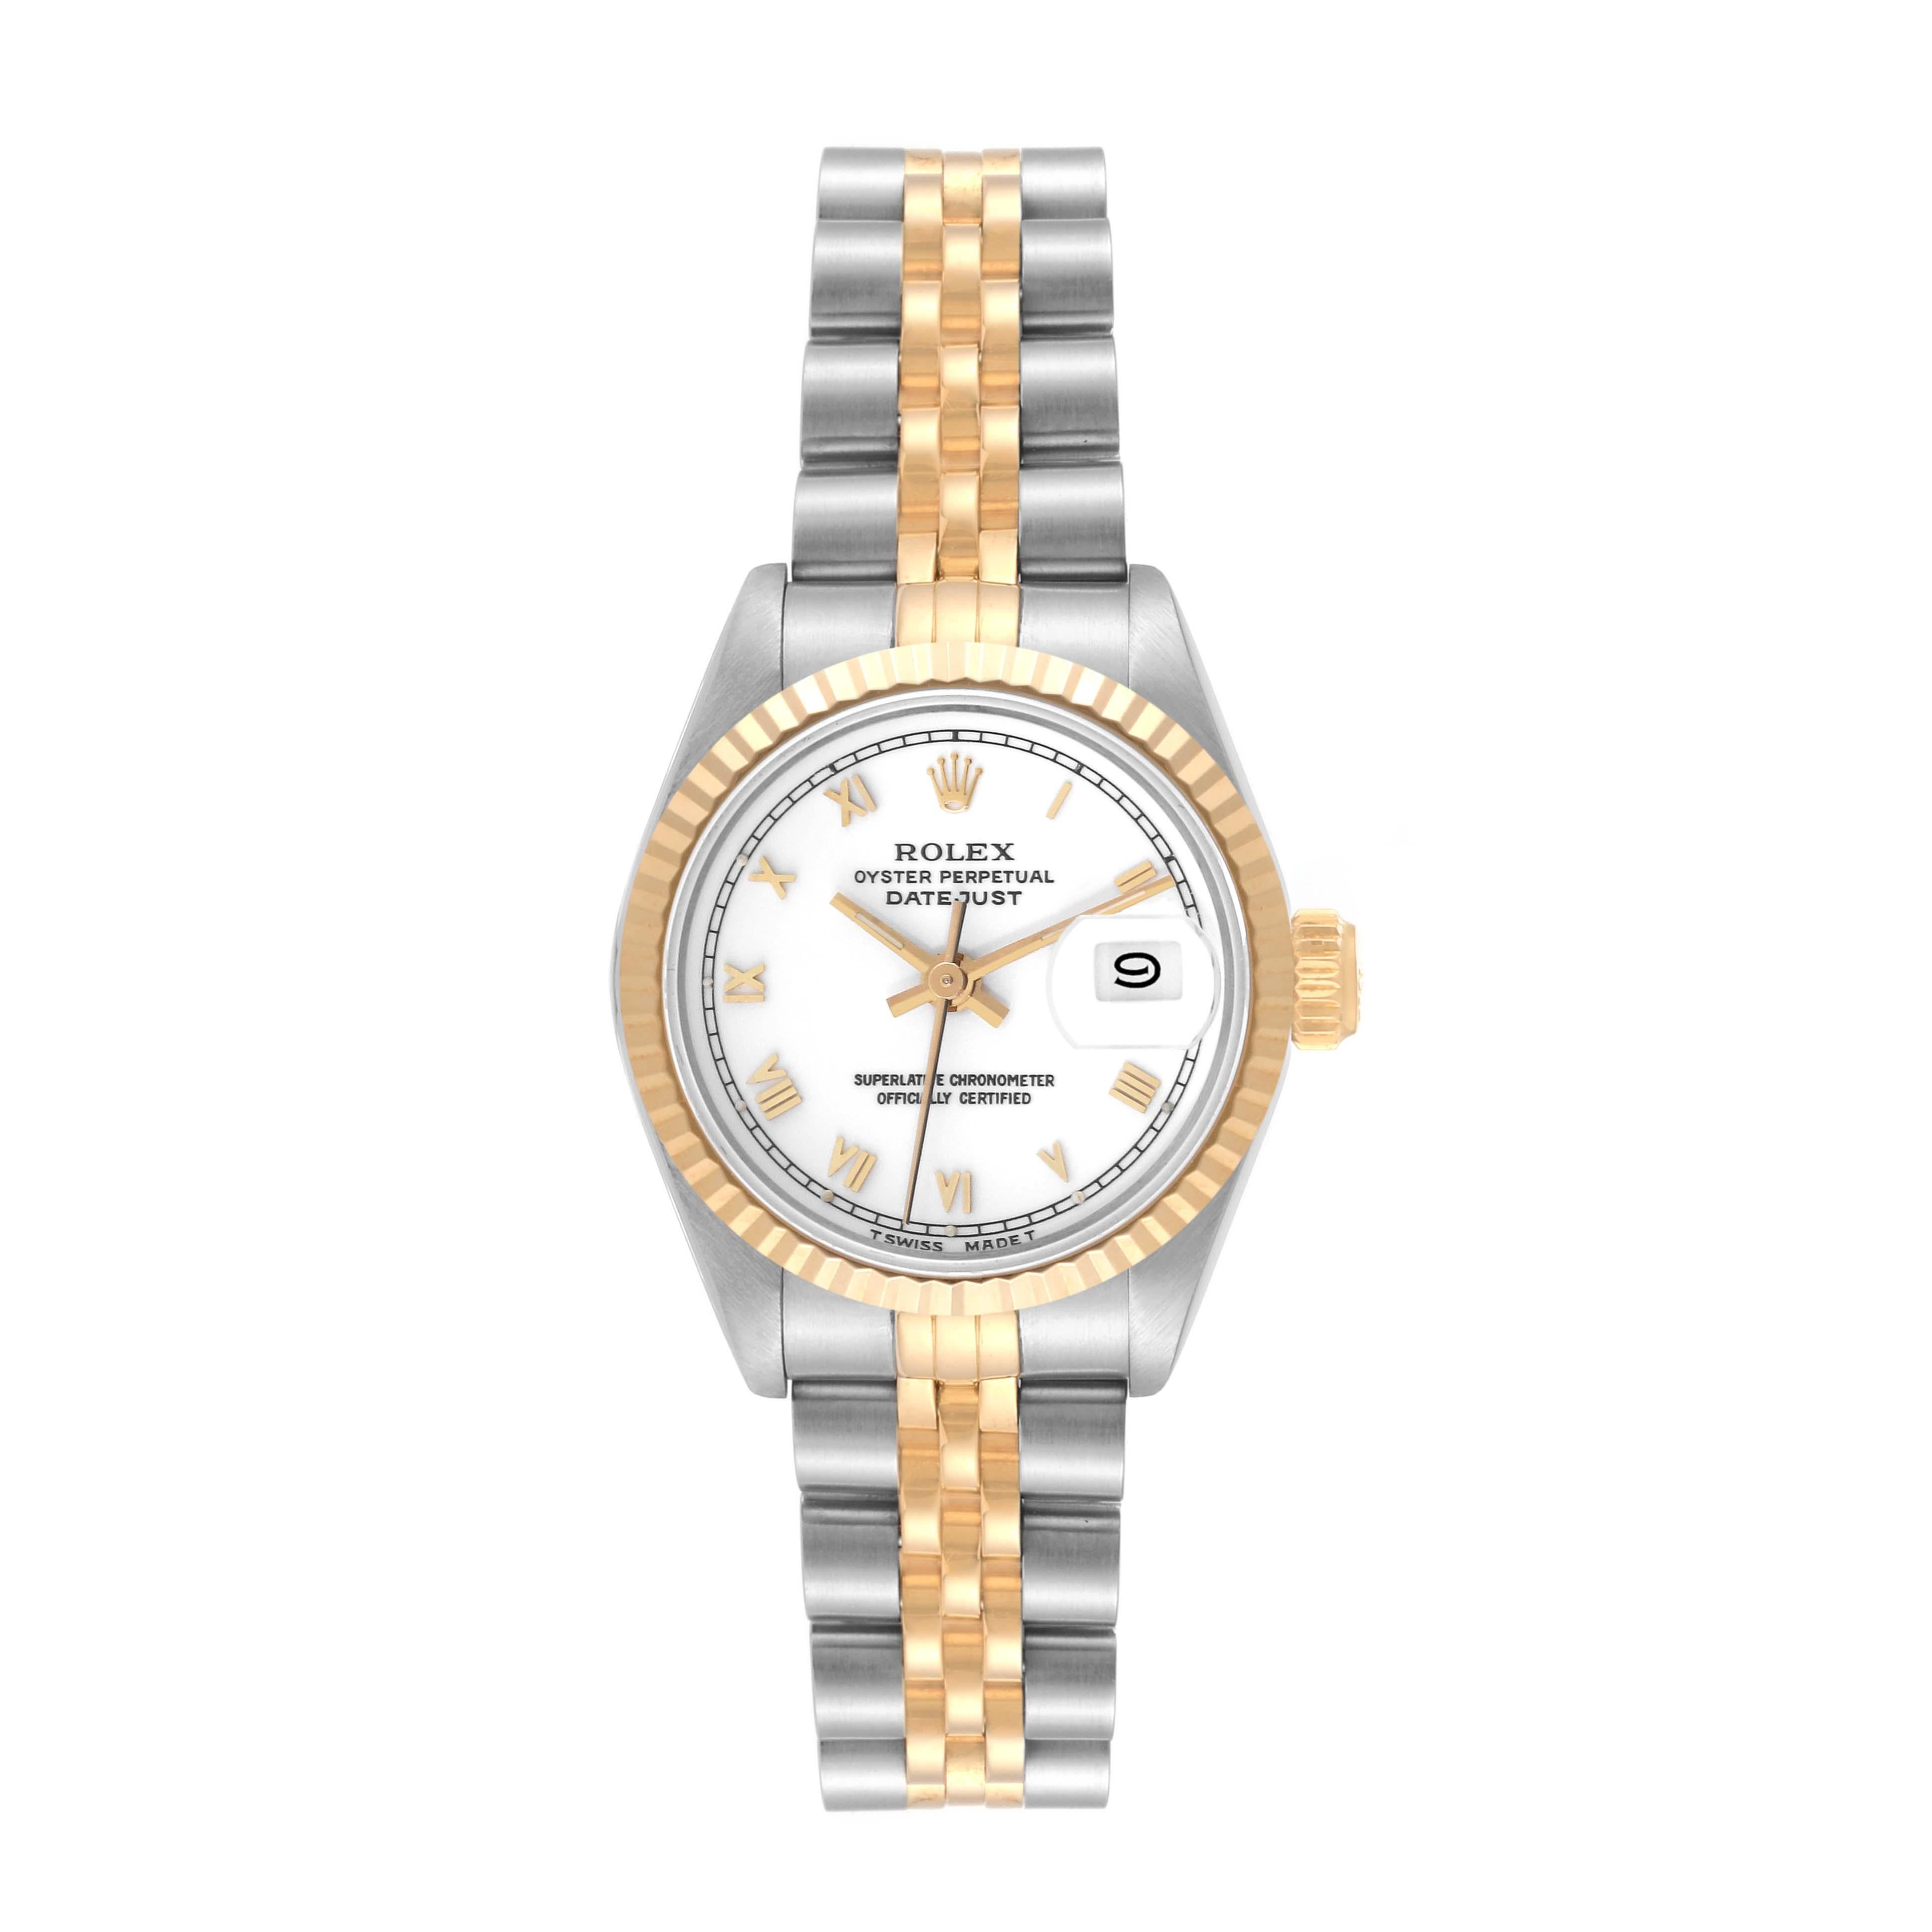 Rolex Datejust White Roman Dial Steel Yellow Gold Ladies Watch 69173 For Sale 6